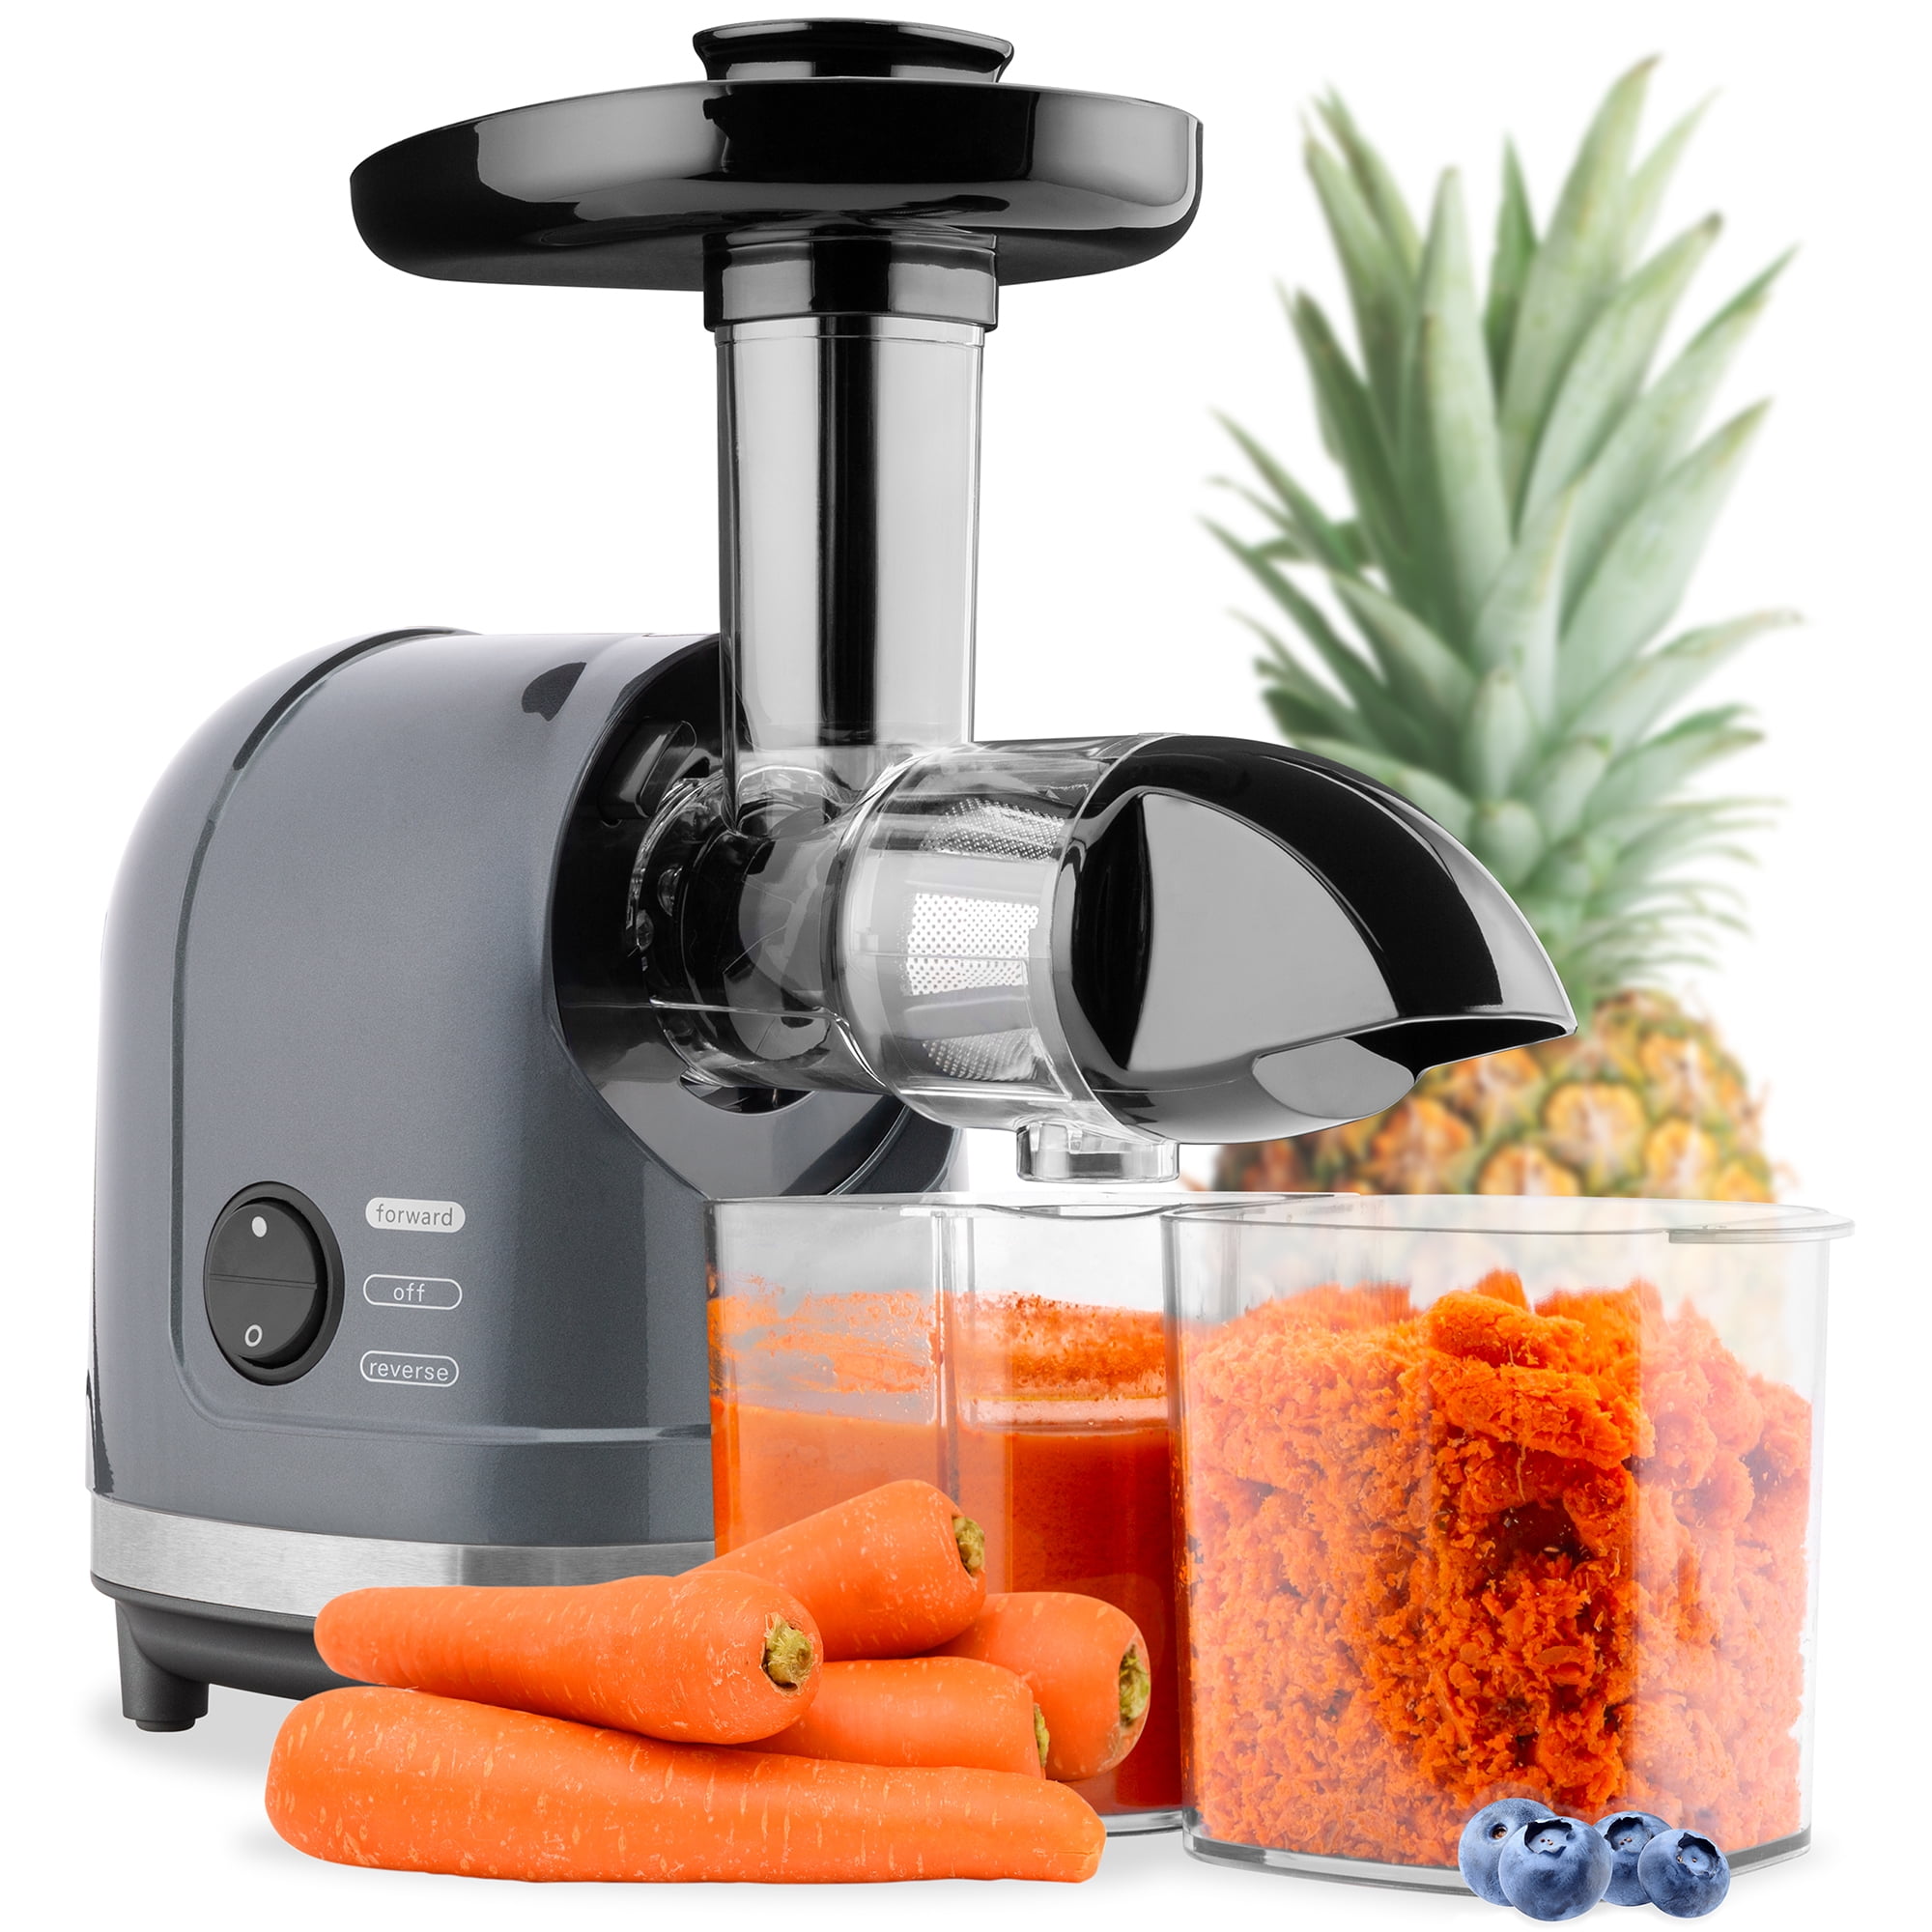 High Nutrient Juice Reducing Oxidation Cold Press Juicer Lowest Noise OUTAD 150W Low Speed Masticating Juicer Extractor Bigger Container with Cleaning Brush 